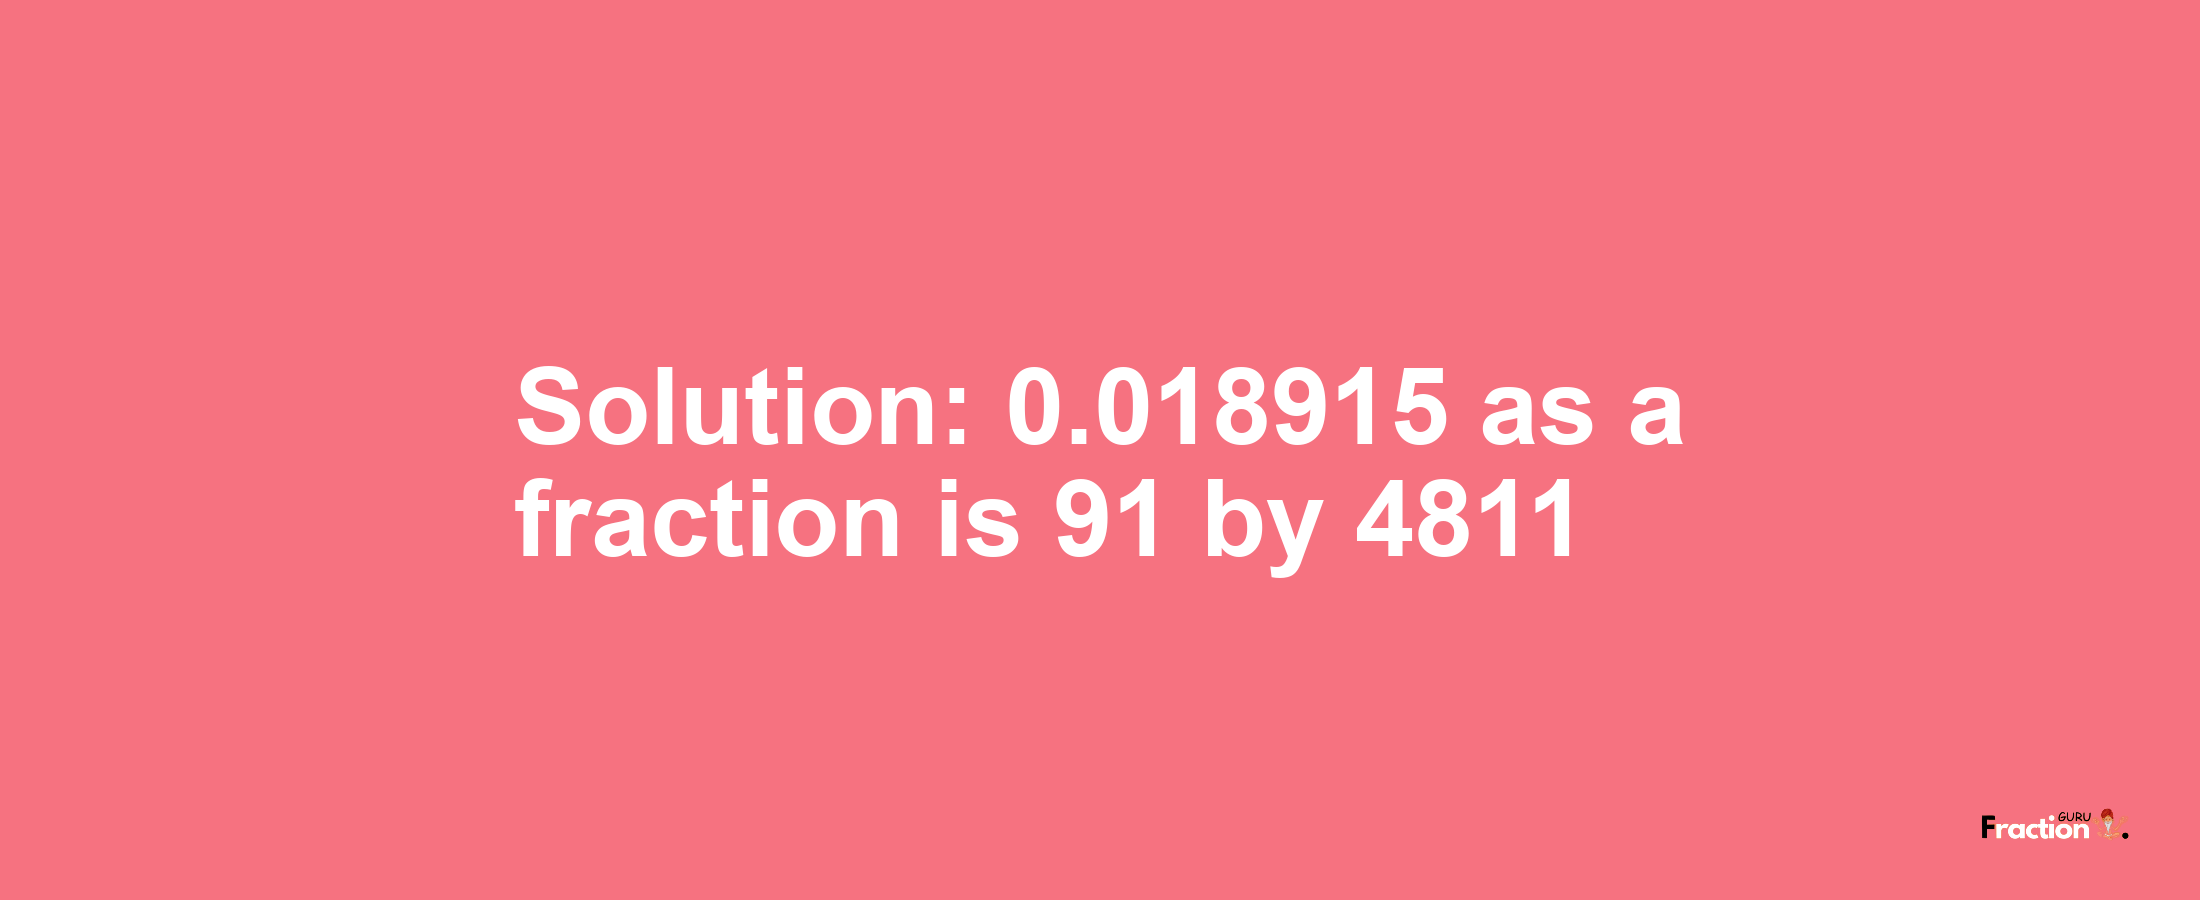 Solution:0.018915 as a fraction is 91/4811